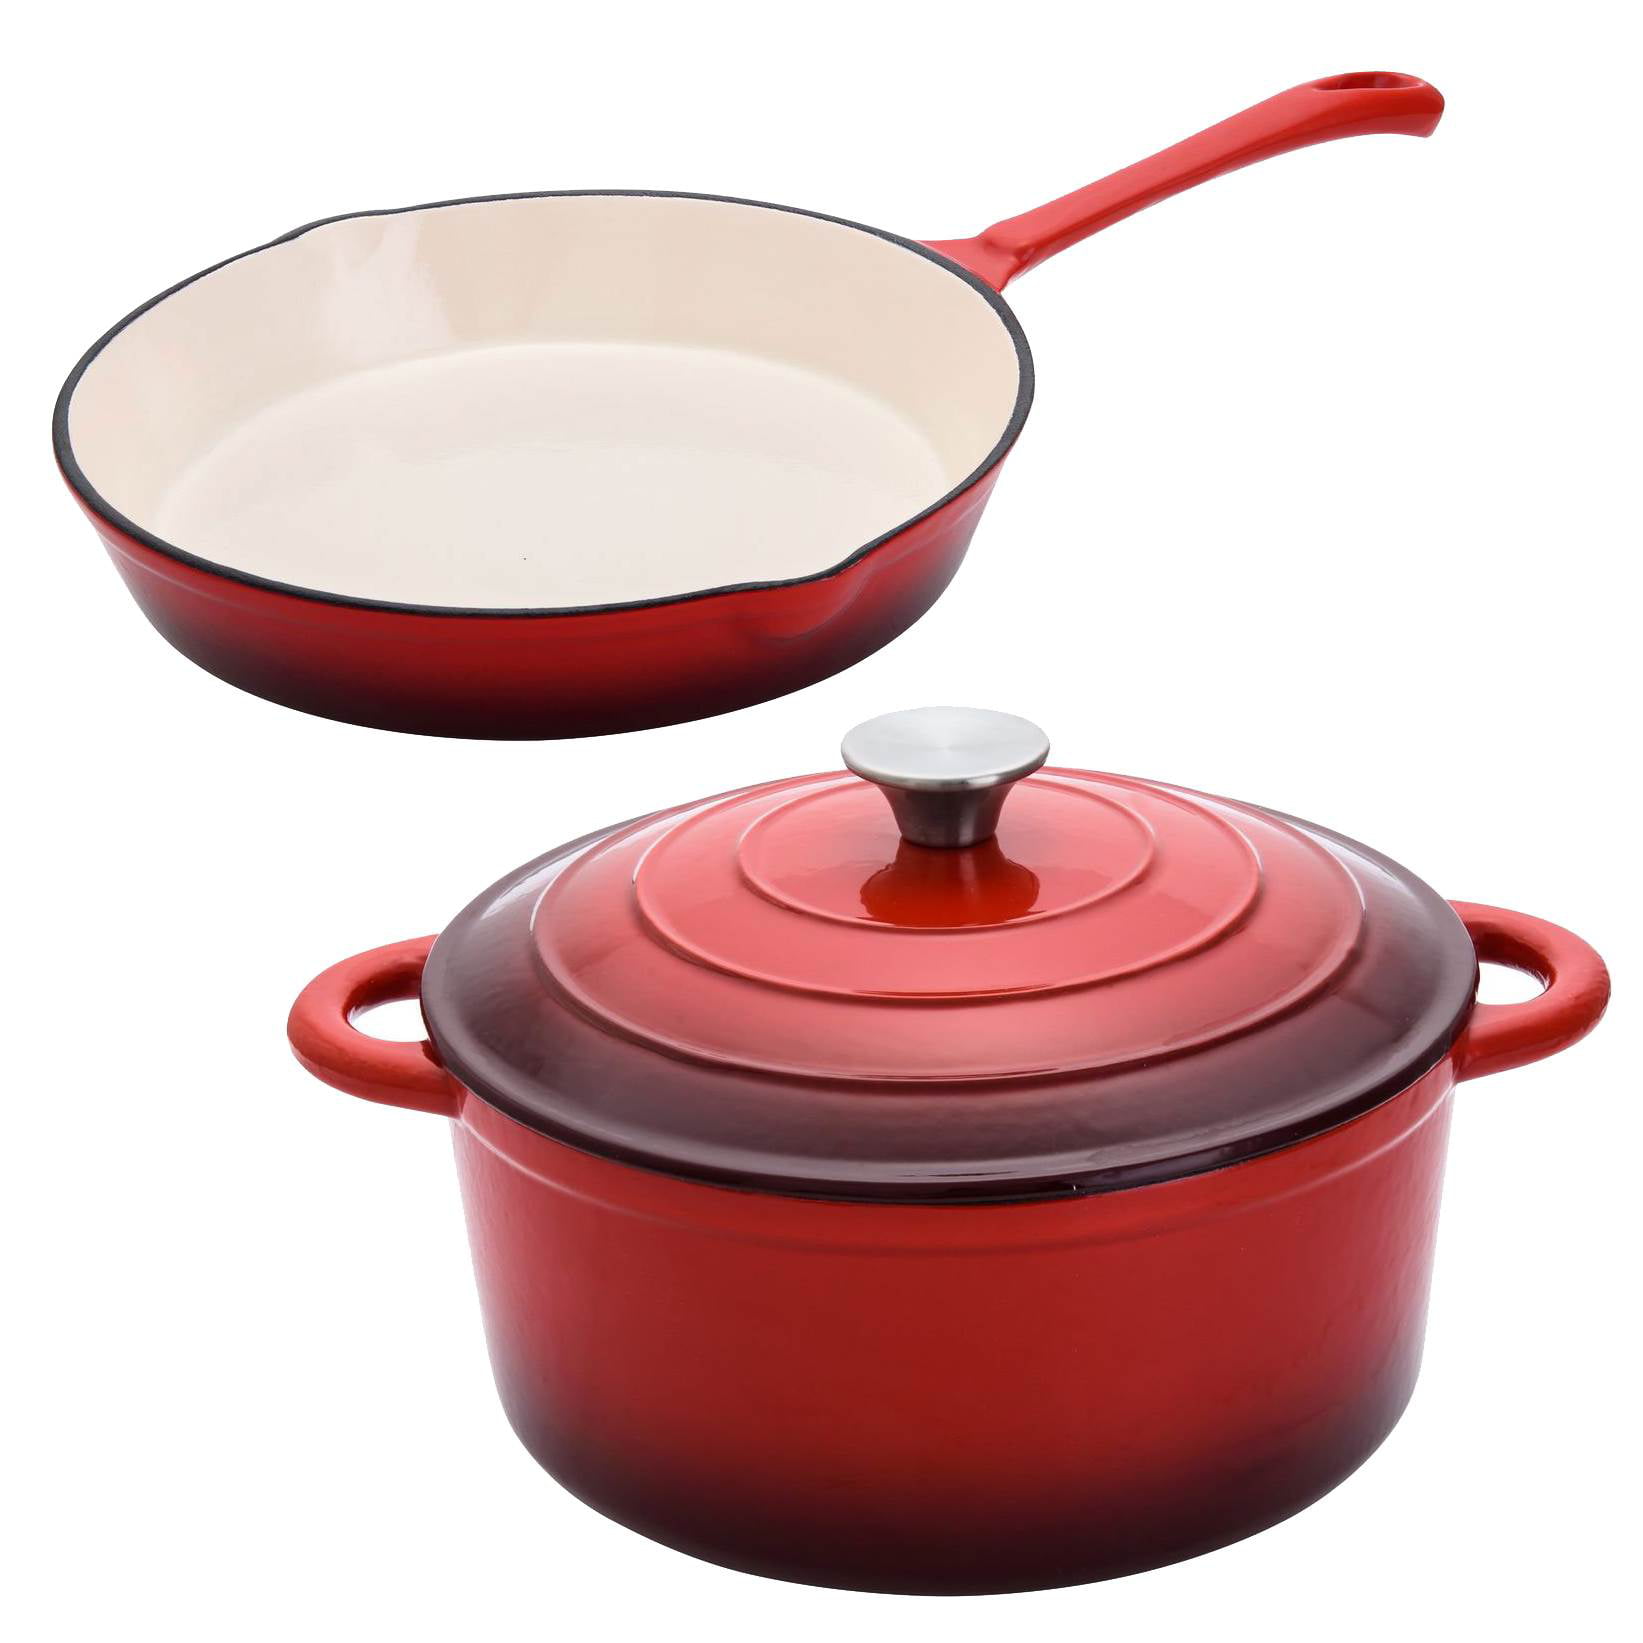 Braiser Pan skillet Dutch oven with lid 4 mini cocottes with Lids Enameled Cast Iron 22 Piece Gift Set rectangular baking dish with lid sauce pan 5 silicone and wooden utensils cutlery holder 